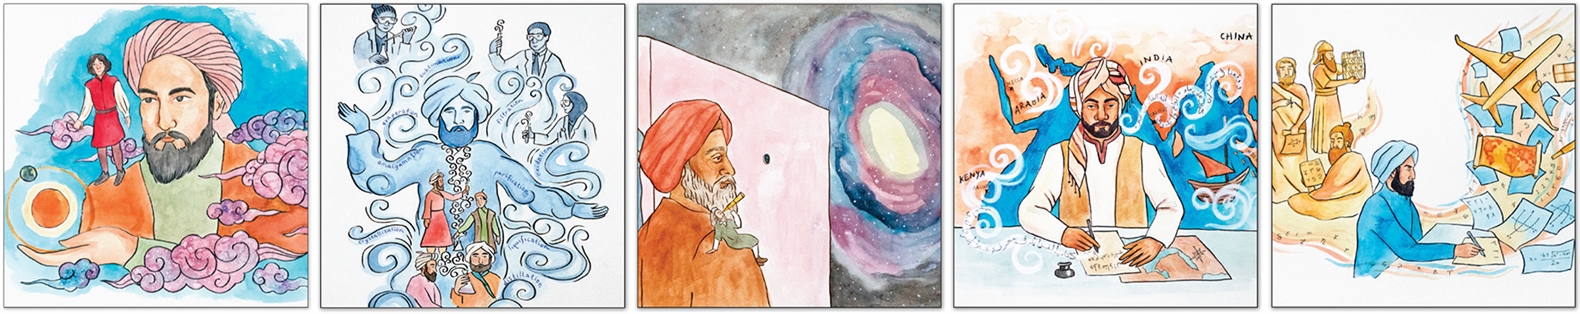 A series of illustrations of Islamic scholars of antiquity exploring scientific concepts.